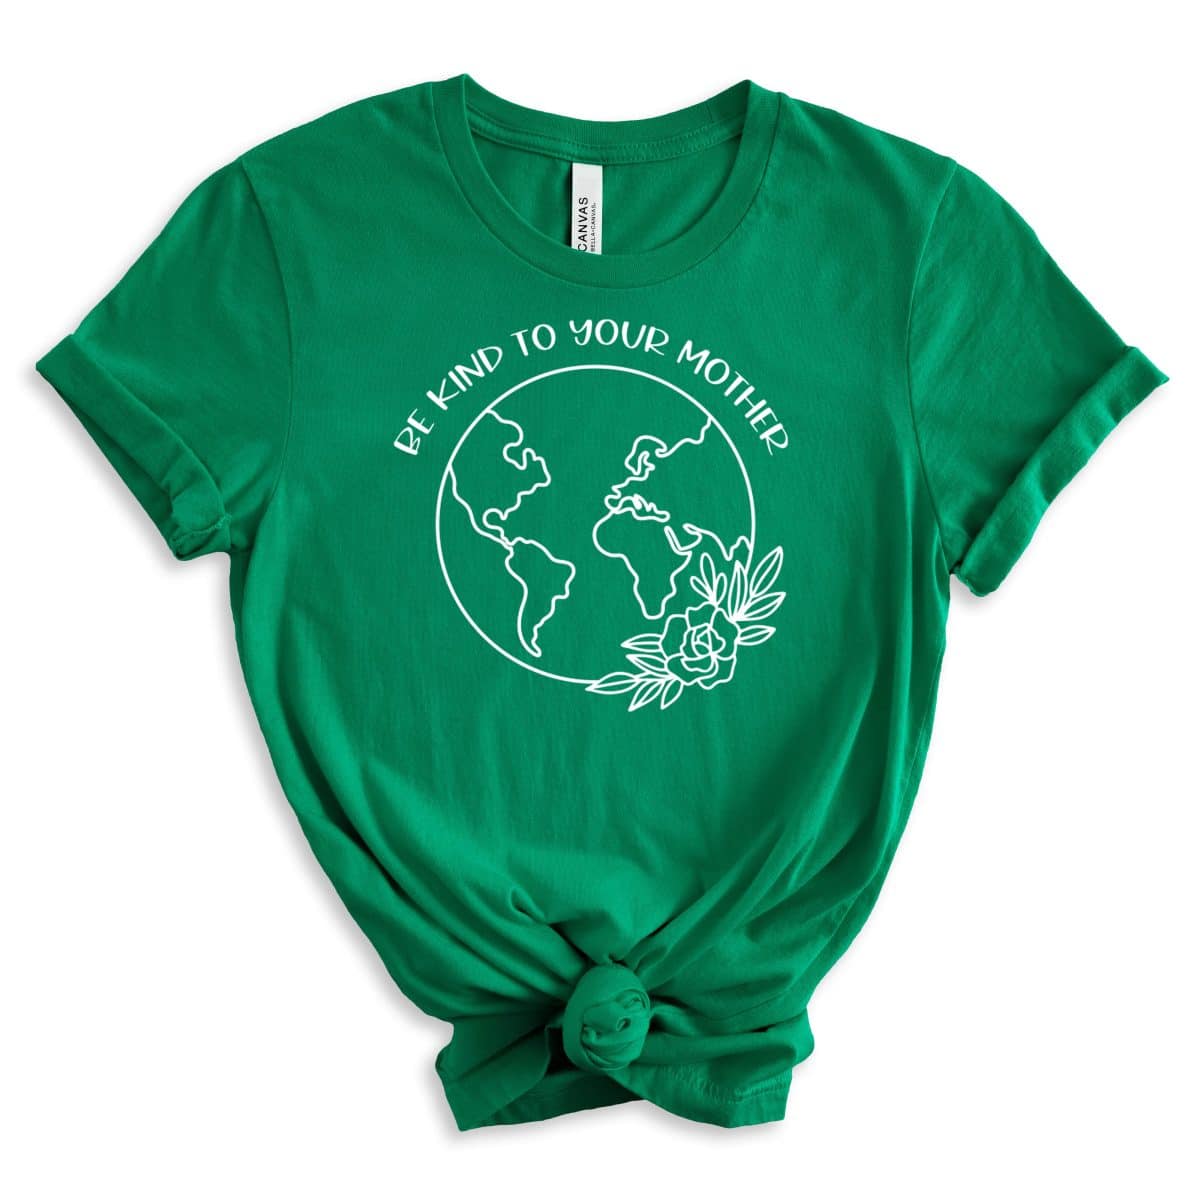 Be Kind to Your Mother Shirt by Brooklyn Berry Designs